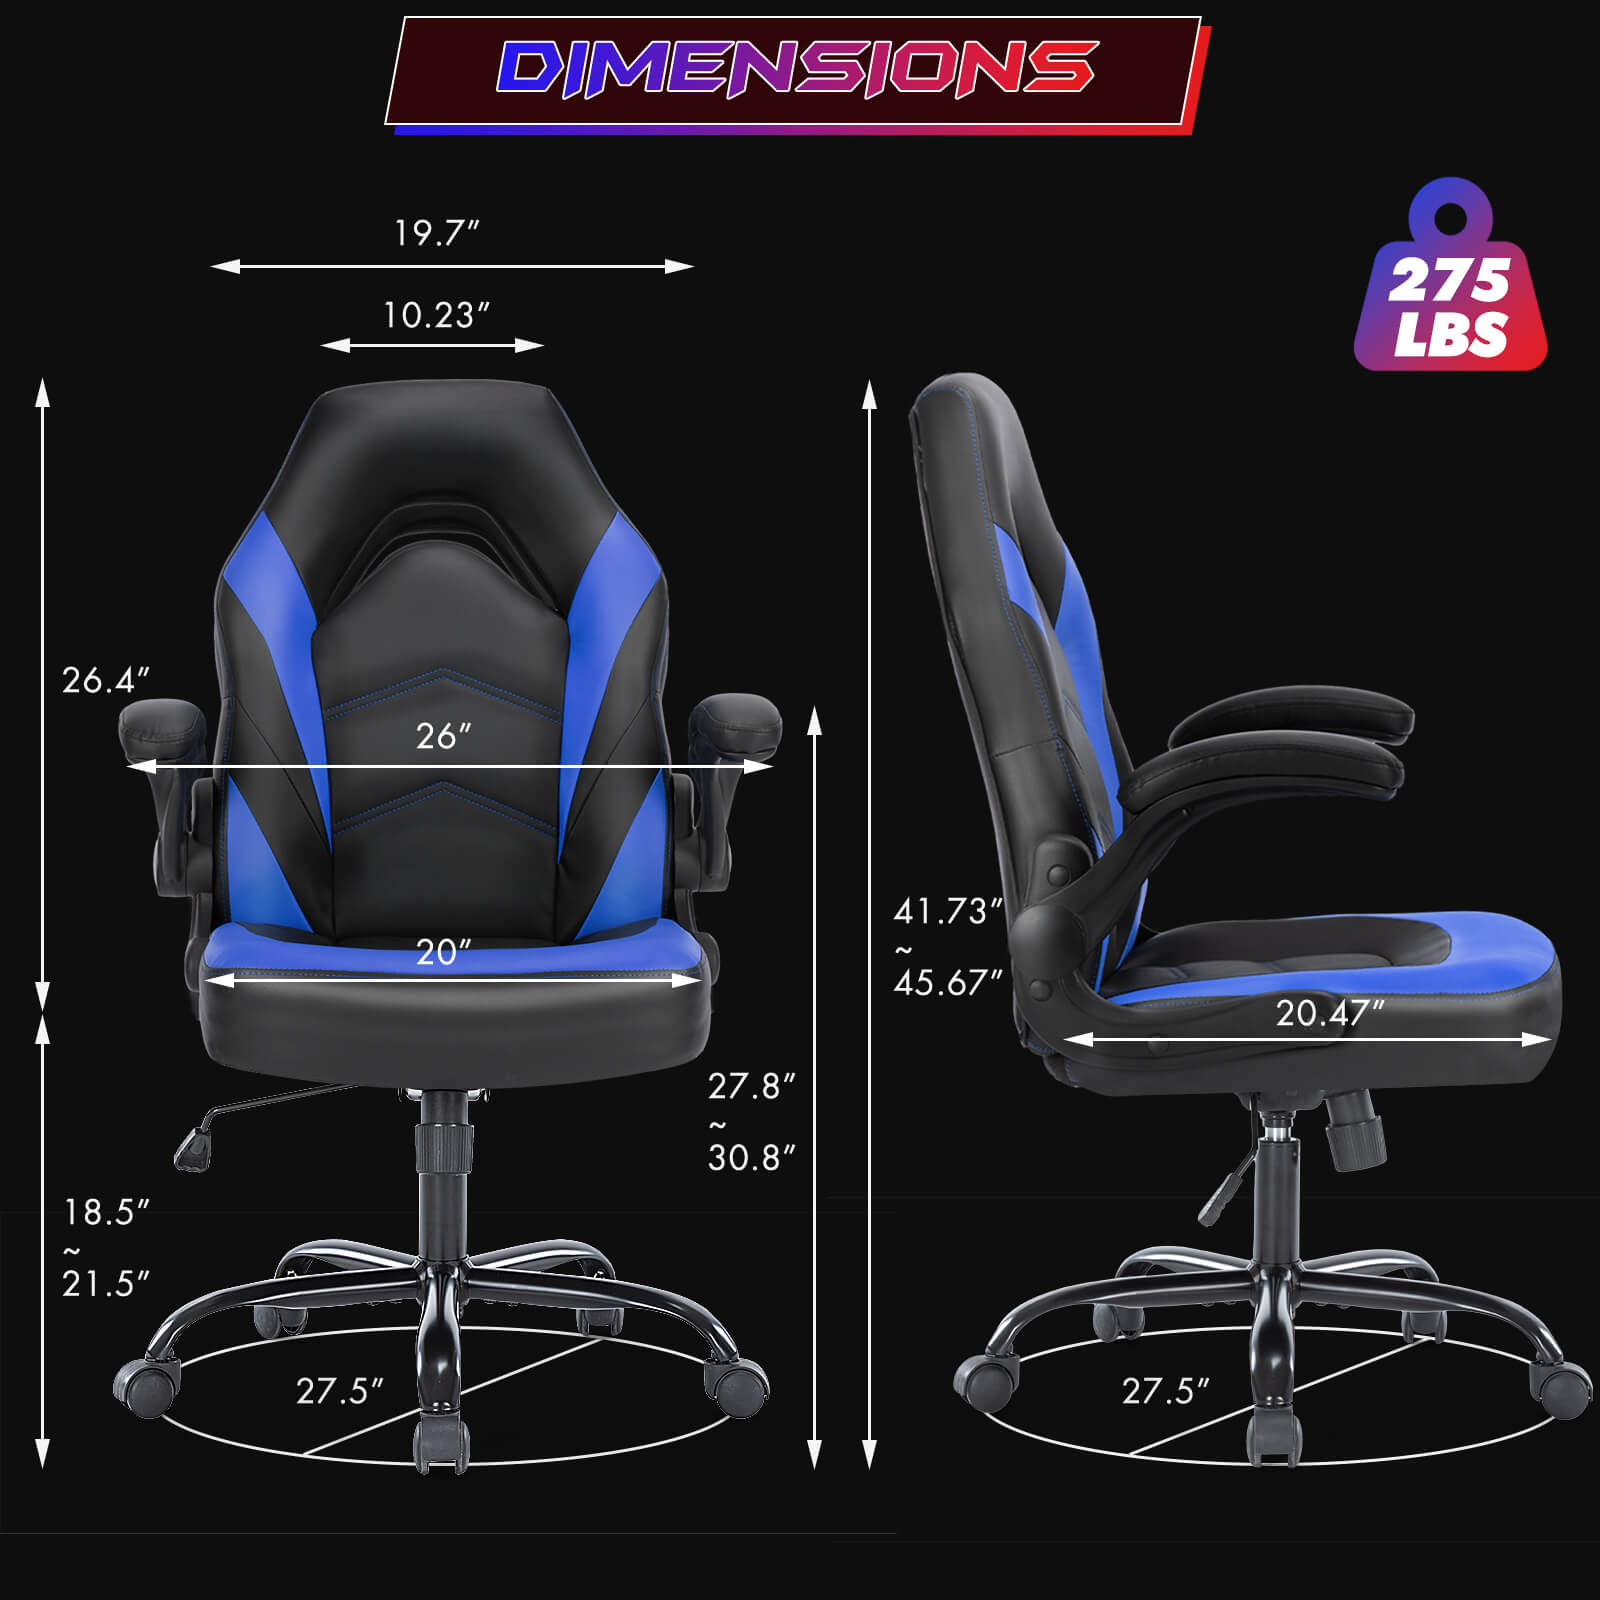 Ergonomic Leather Gaming Chair-Office Desk PU Leather Chair -up Armrests, Swivel Task Chair Adjustable Height for Adults Teens Kids